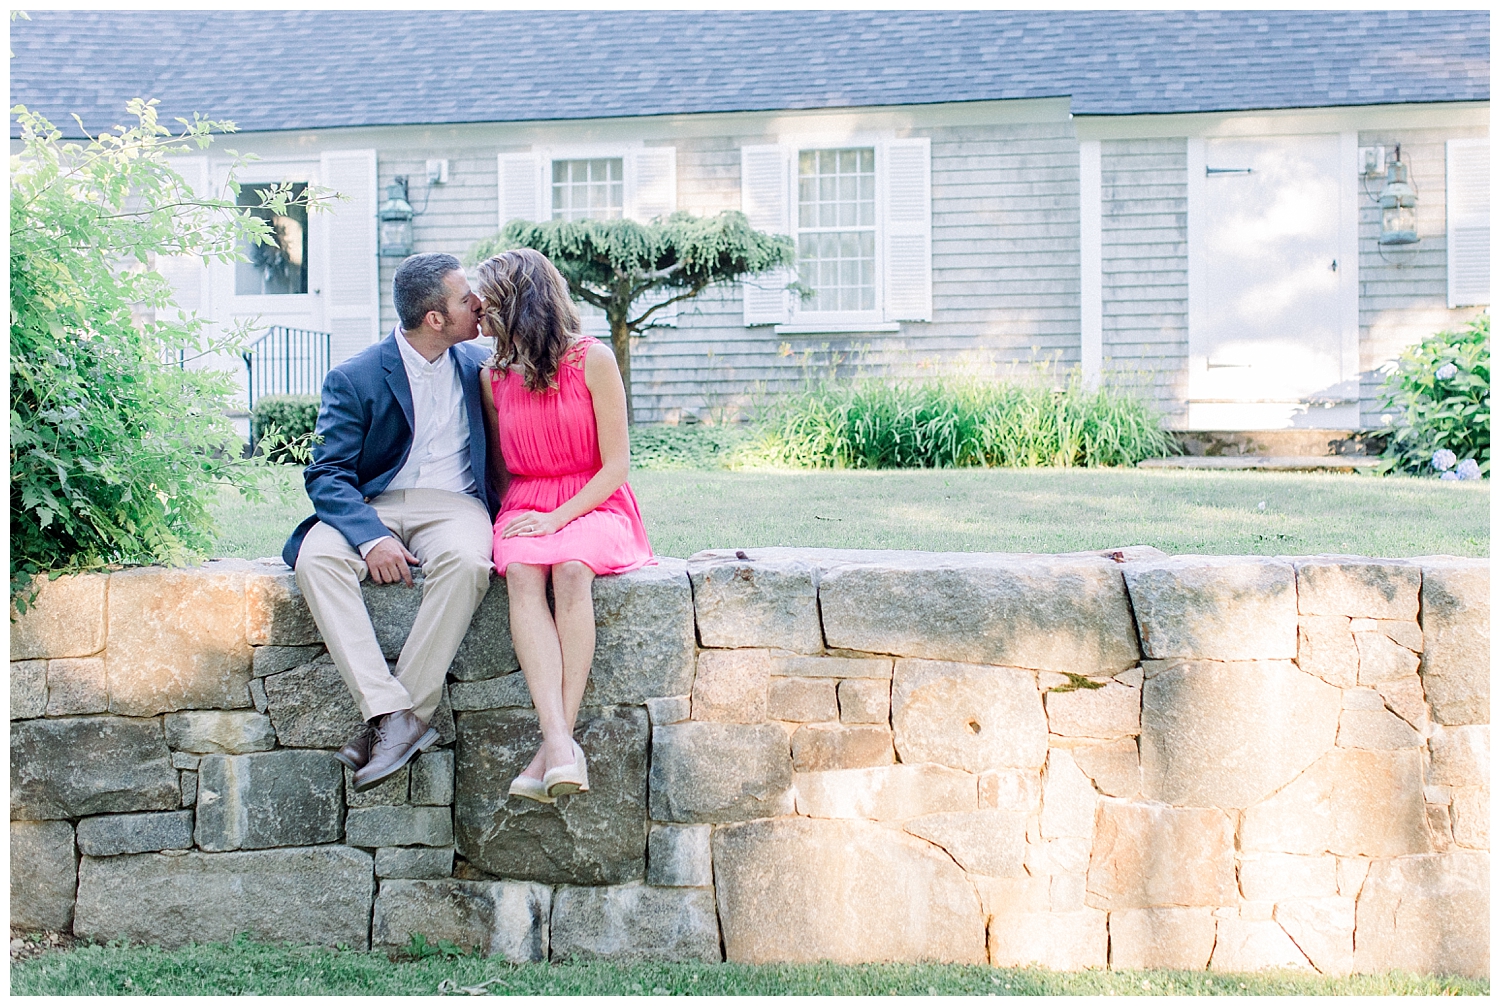 York, Maine coastal engagement session at Southern Maine family property. Photos by Halie Olszowy.